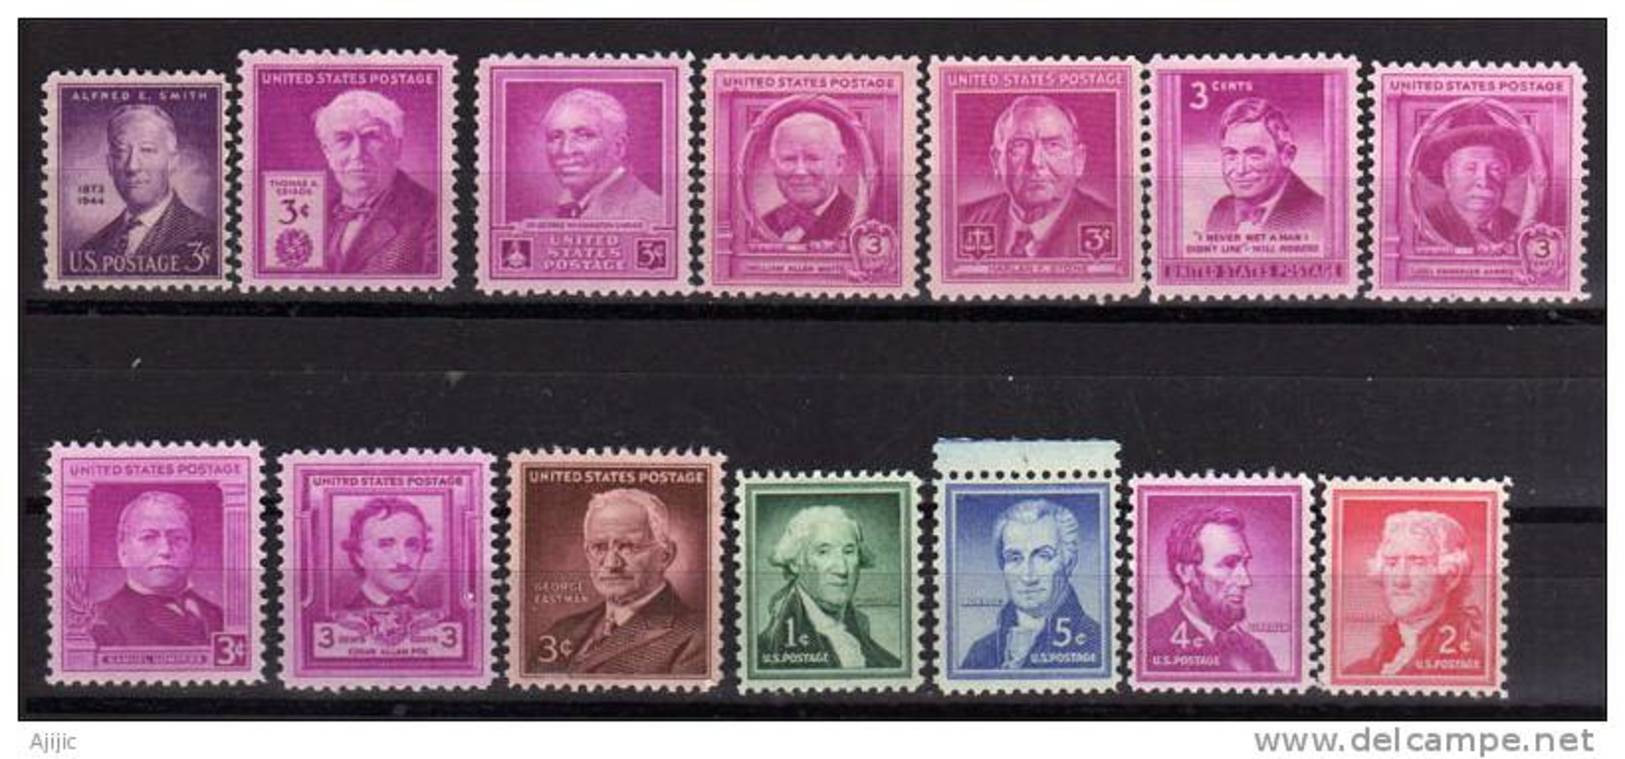 Personnalites Americaines (Edgar A.Poe,Jefferson,Lincoln,James Monroe,Will Rogers,etc) 14 T-p Neufs ** - Nuevos